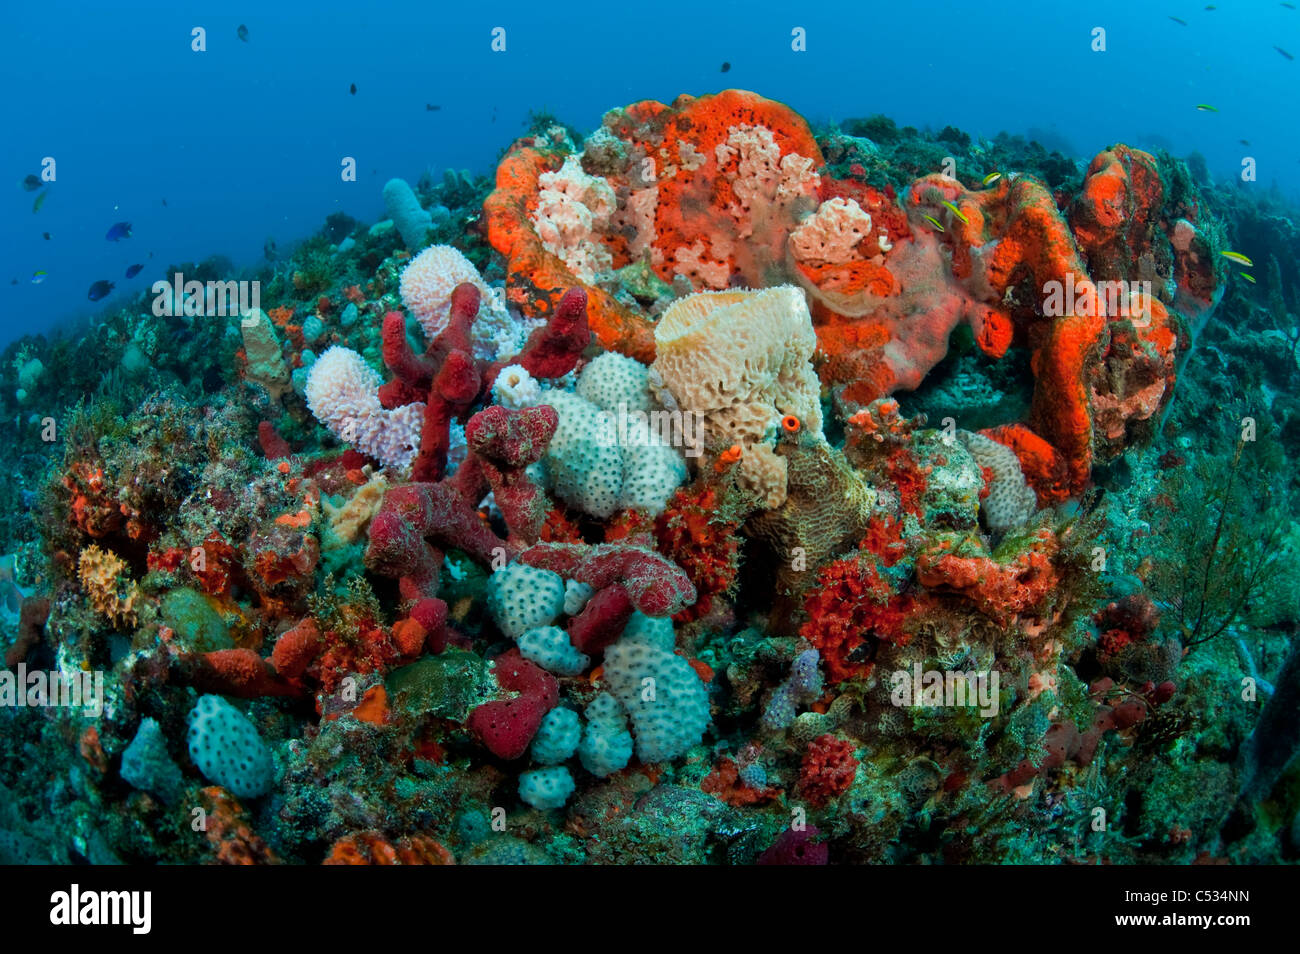 Coral Reef in Palm Beach, Florida with an assortment of invertebrates and fish species. Stock Photo